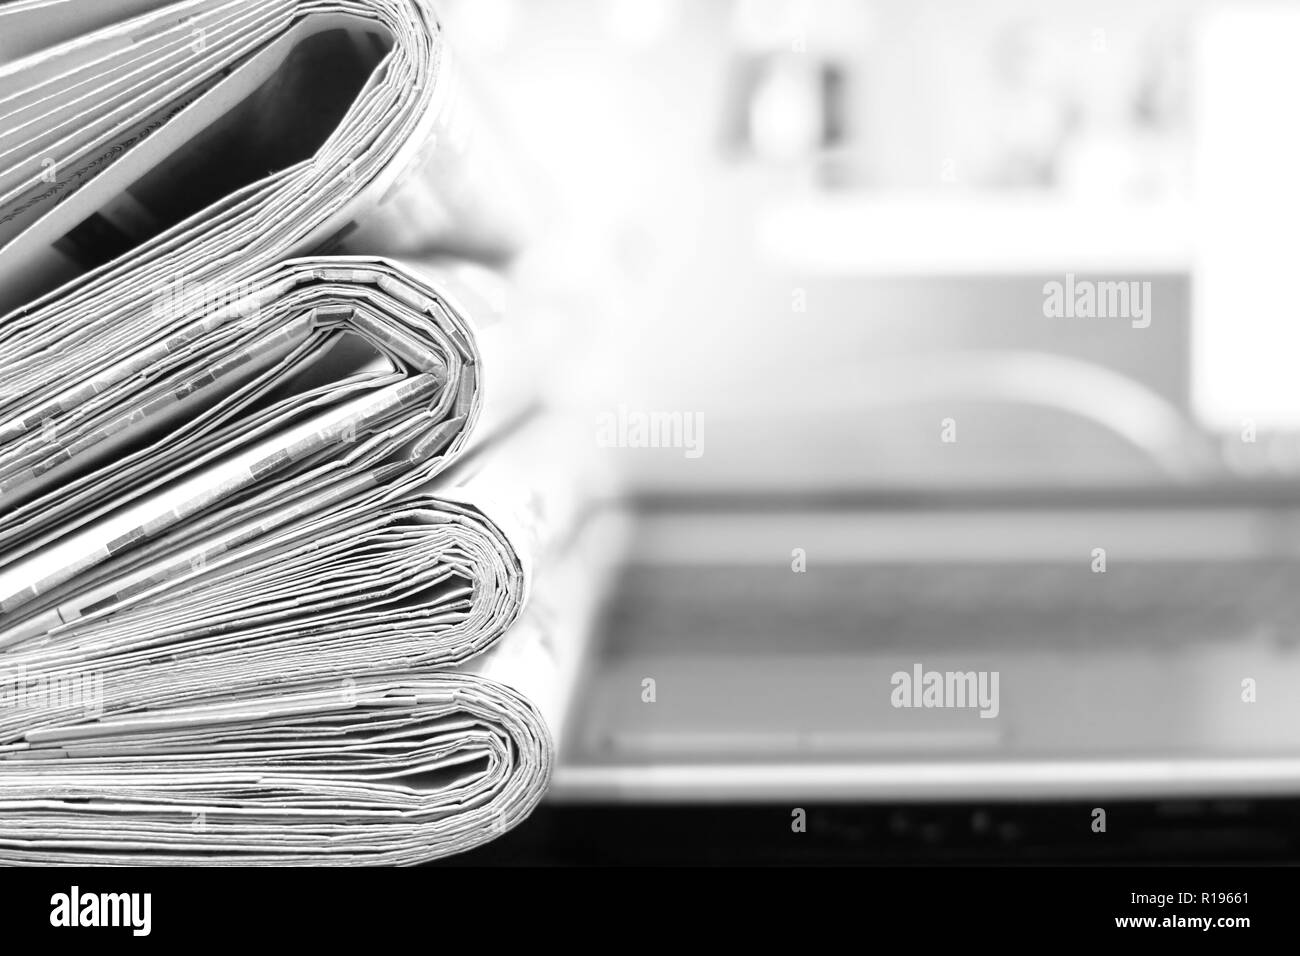 Pile of fresh morning newspapers on the computer. Latest financial and business news in daily paper. Pages with headlines, articles. Stacked journals Stock Photo